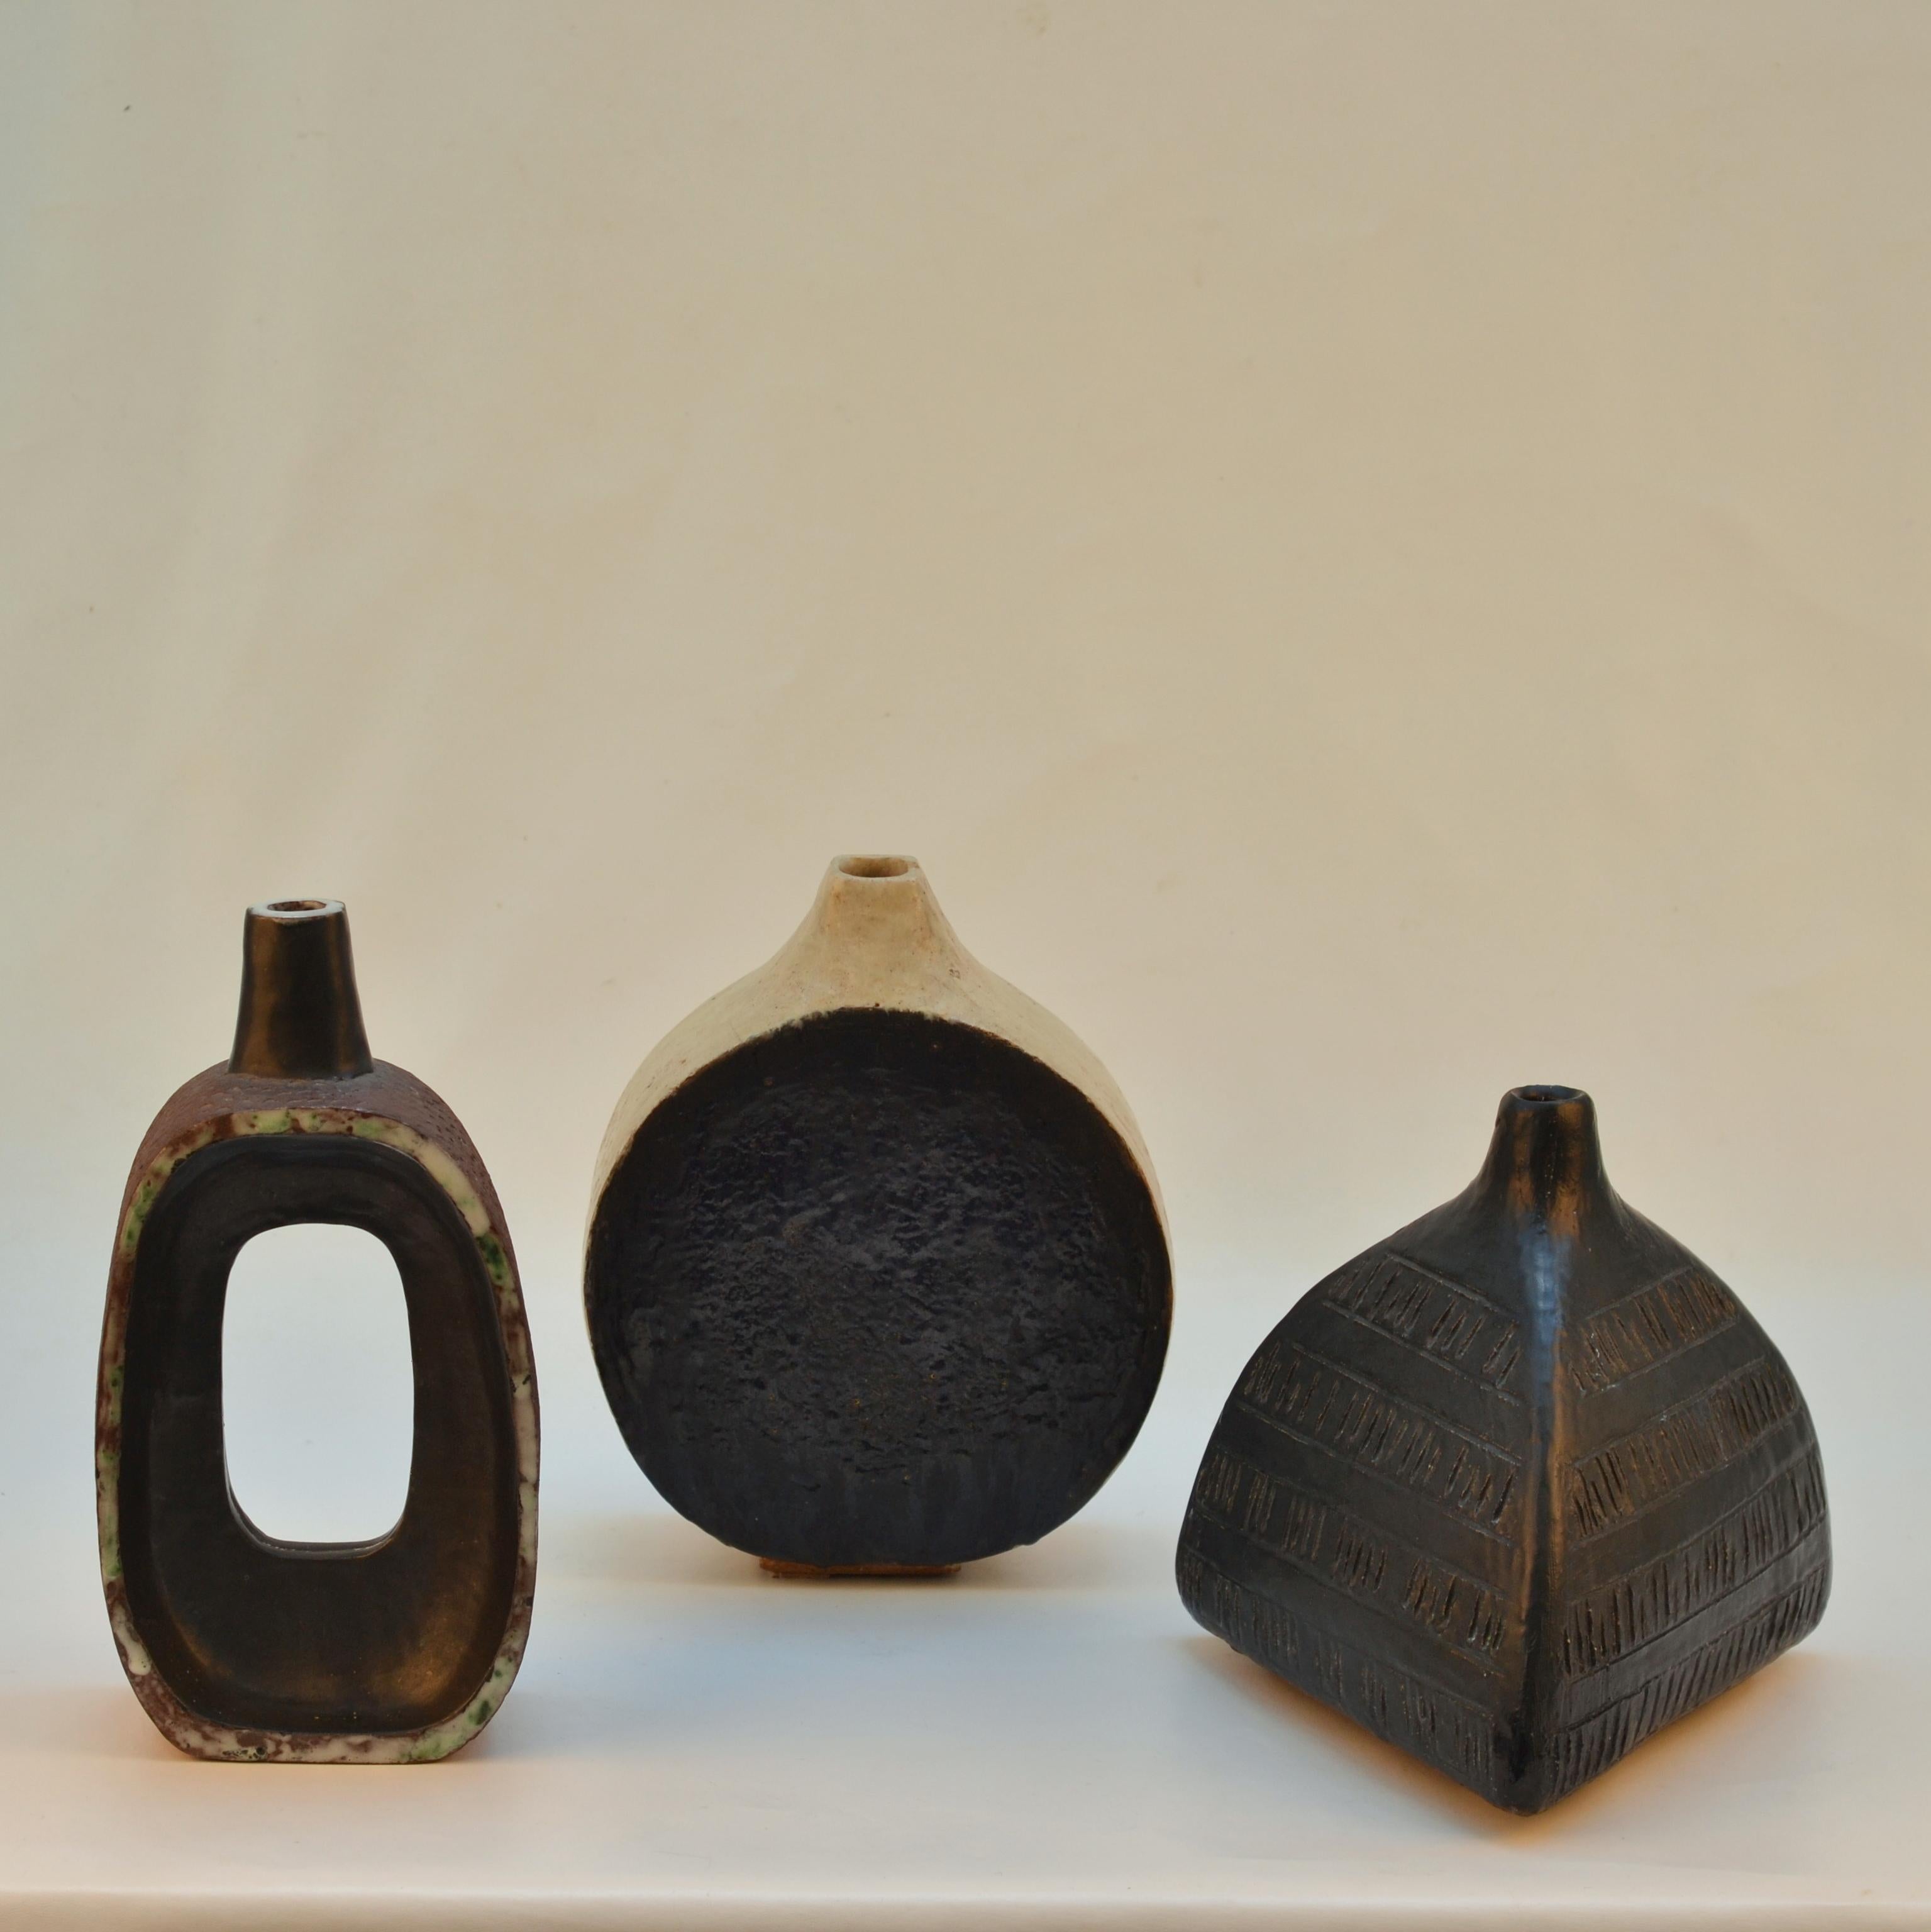 Three unique 1960's hand formed studio pottery by the artist Krystyna Czelny. B 1923 in Poland and living in the UK. 
She is also known for her figurative art of busts and portraits.

Dimensions
Round and flat black and white vase: H 23 cm, W 20